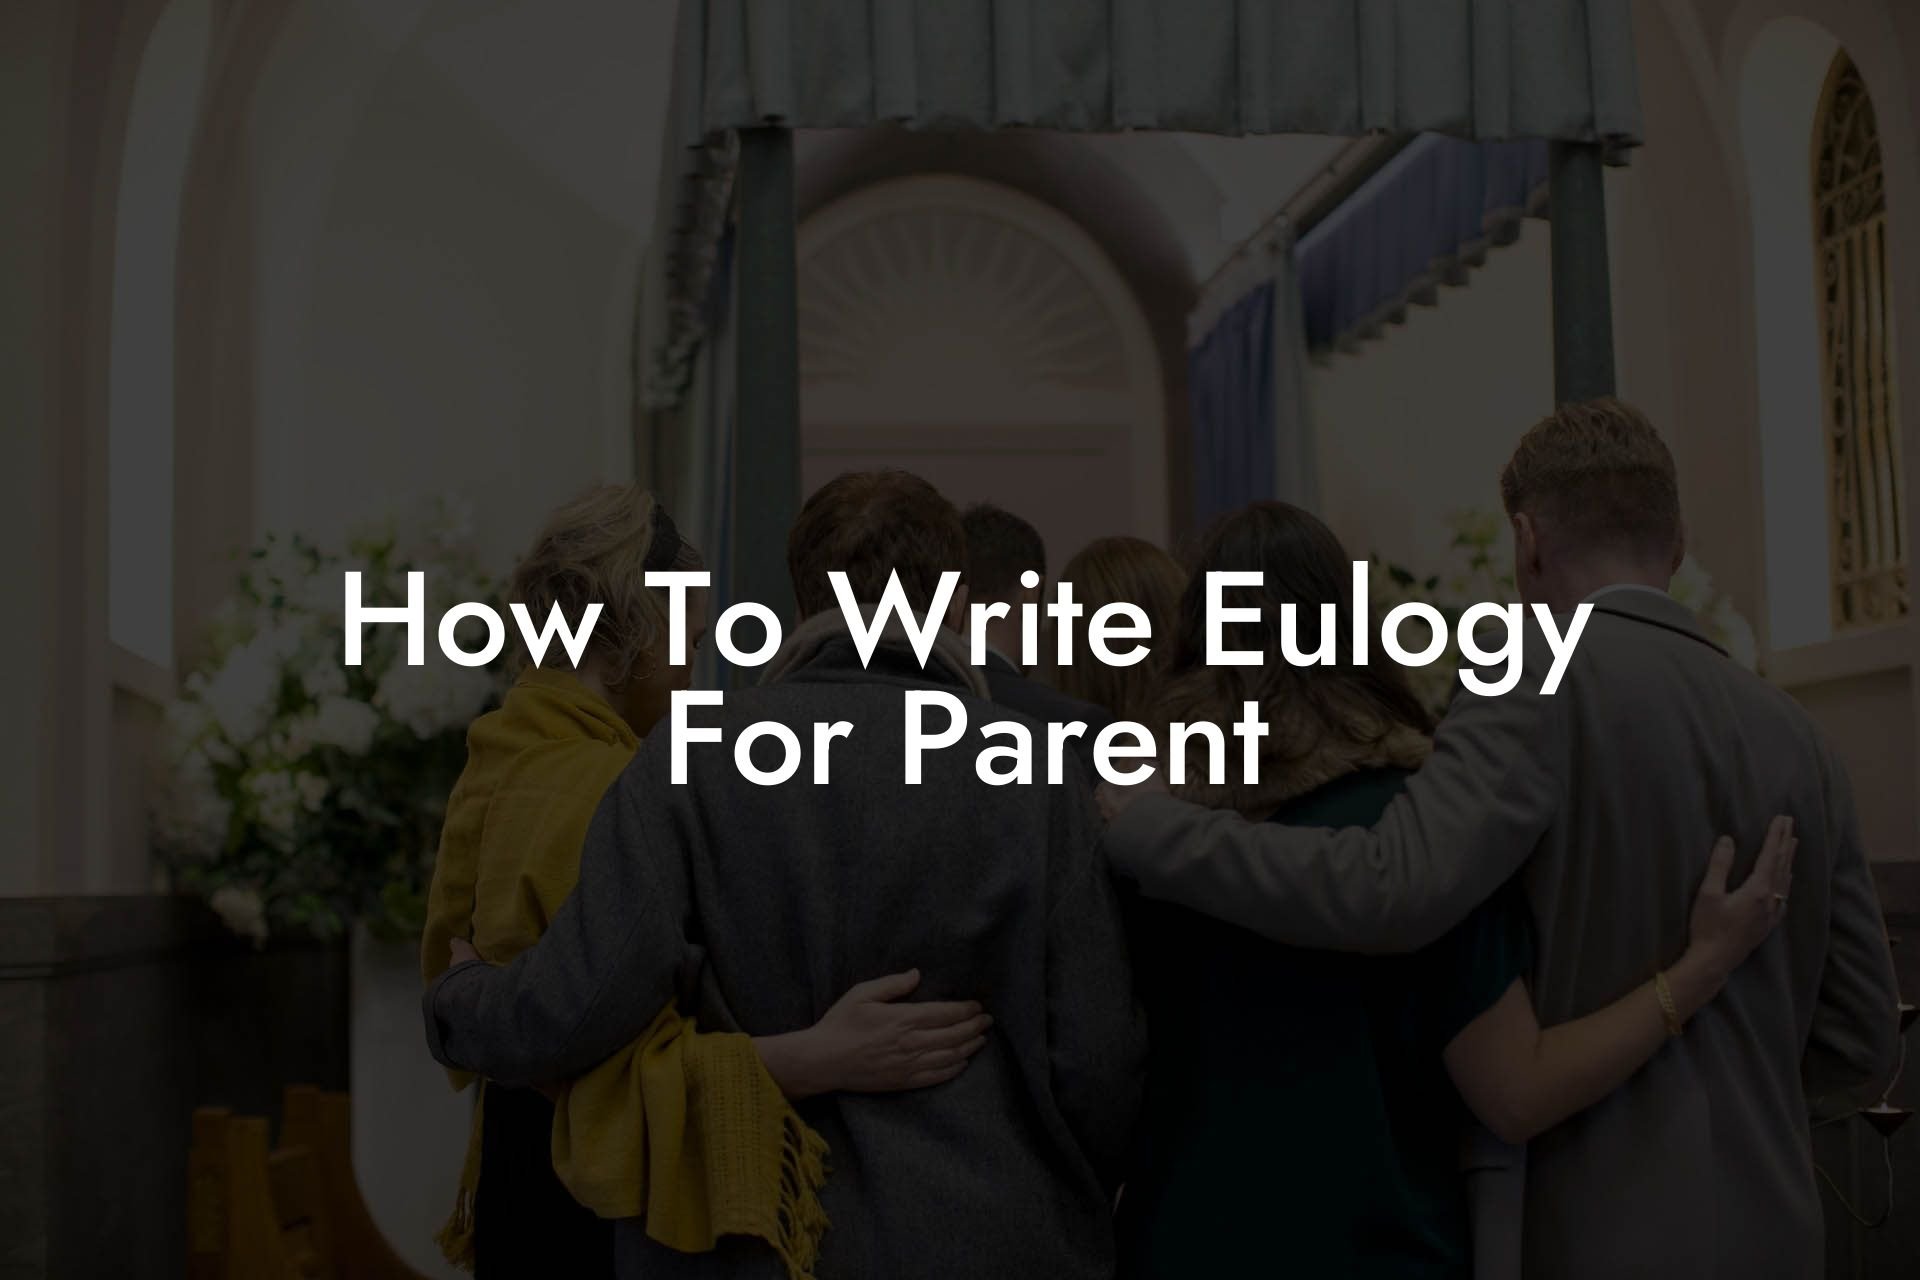 How To Write Eulogy For Parent